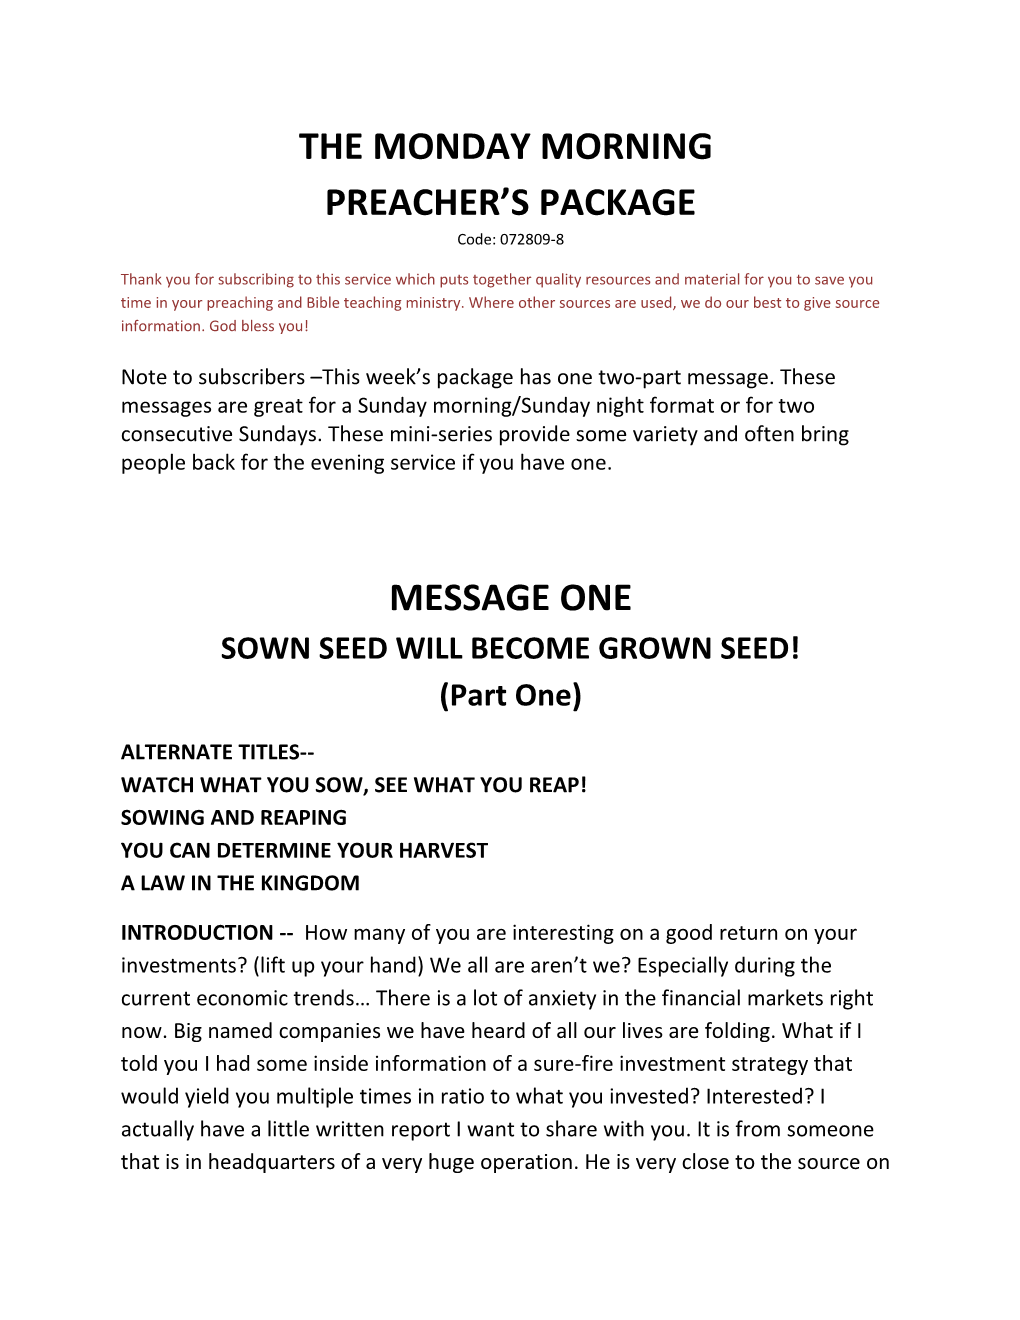 THE MONDAY MORNING PREACHER S PACKAGE Code: 072809-8